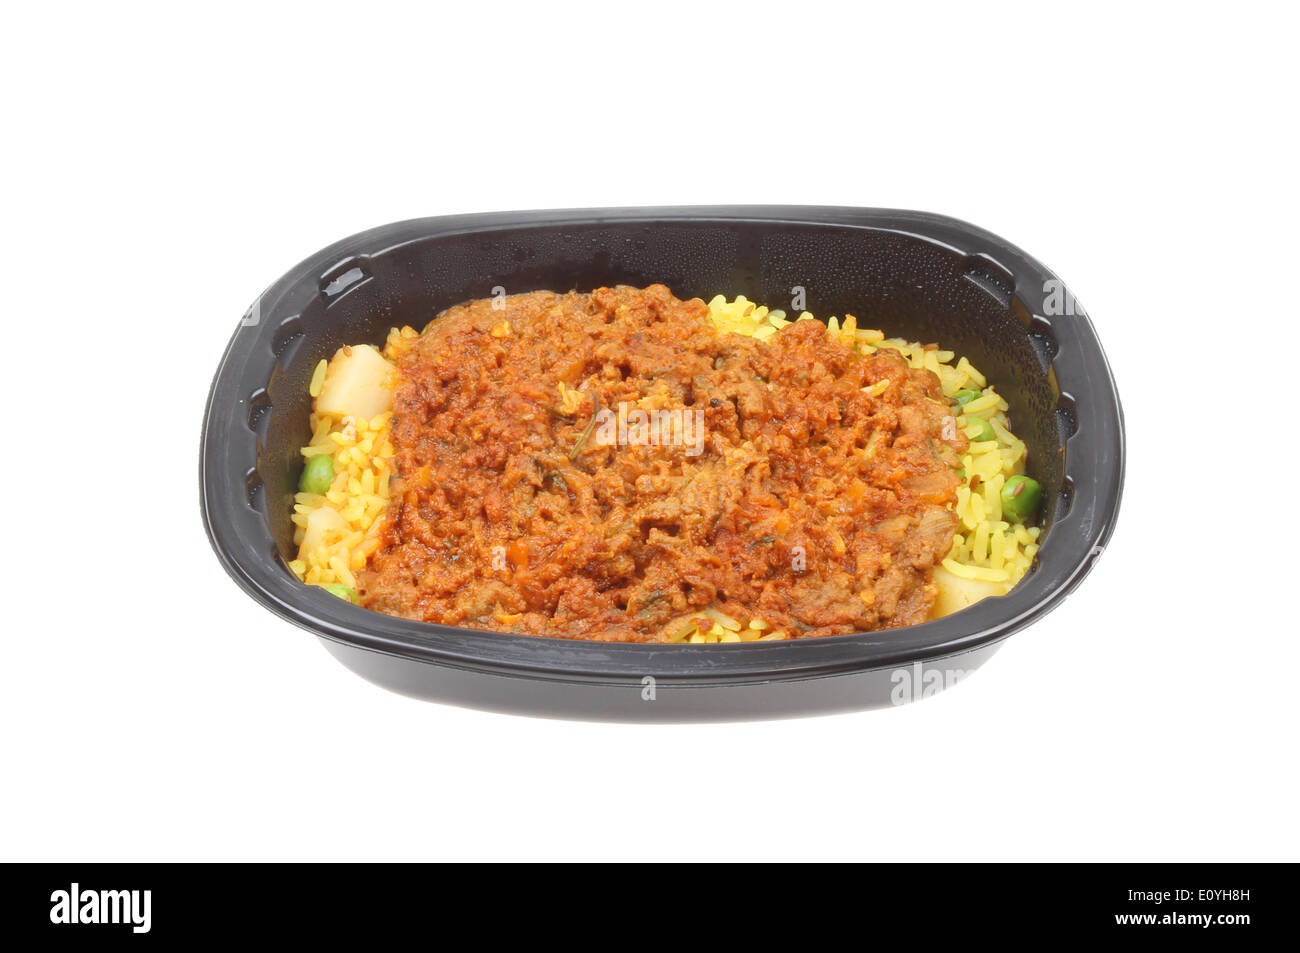 Convenience meal, lamb biryani, in a plastic tray isolated against white Stock Photo